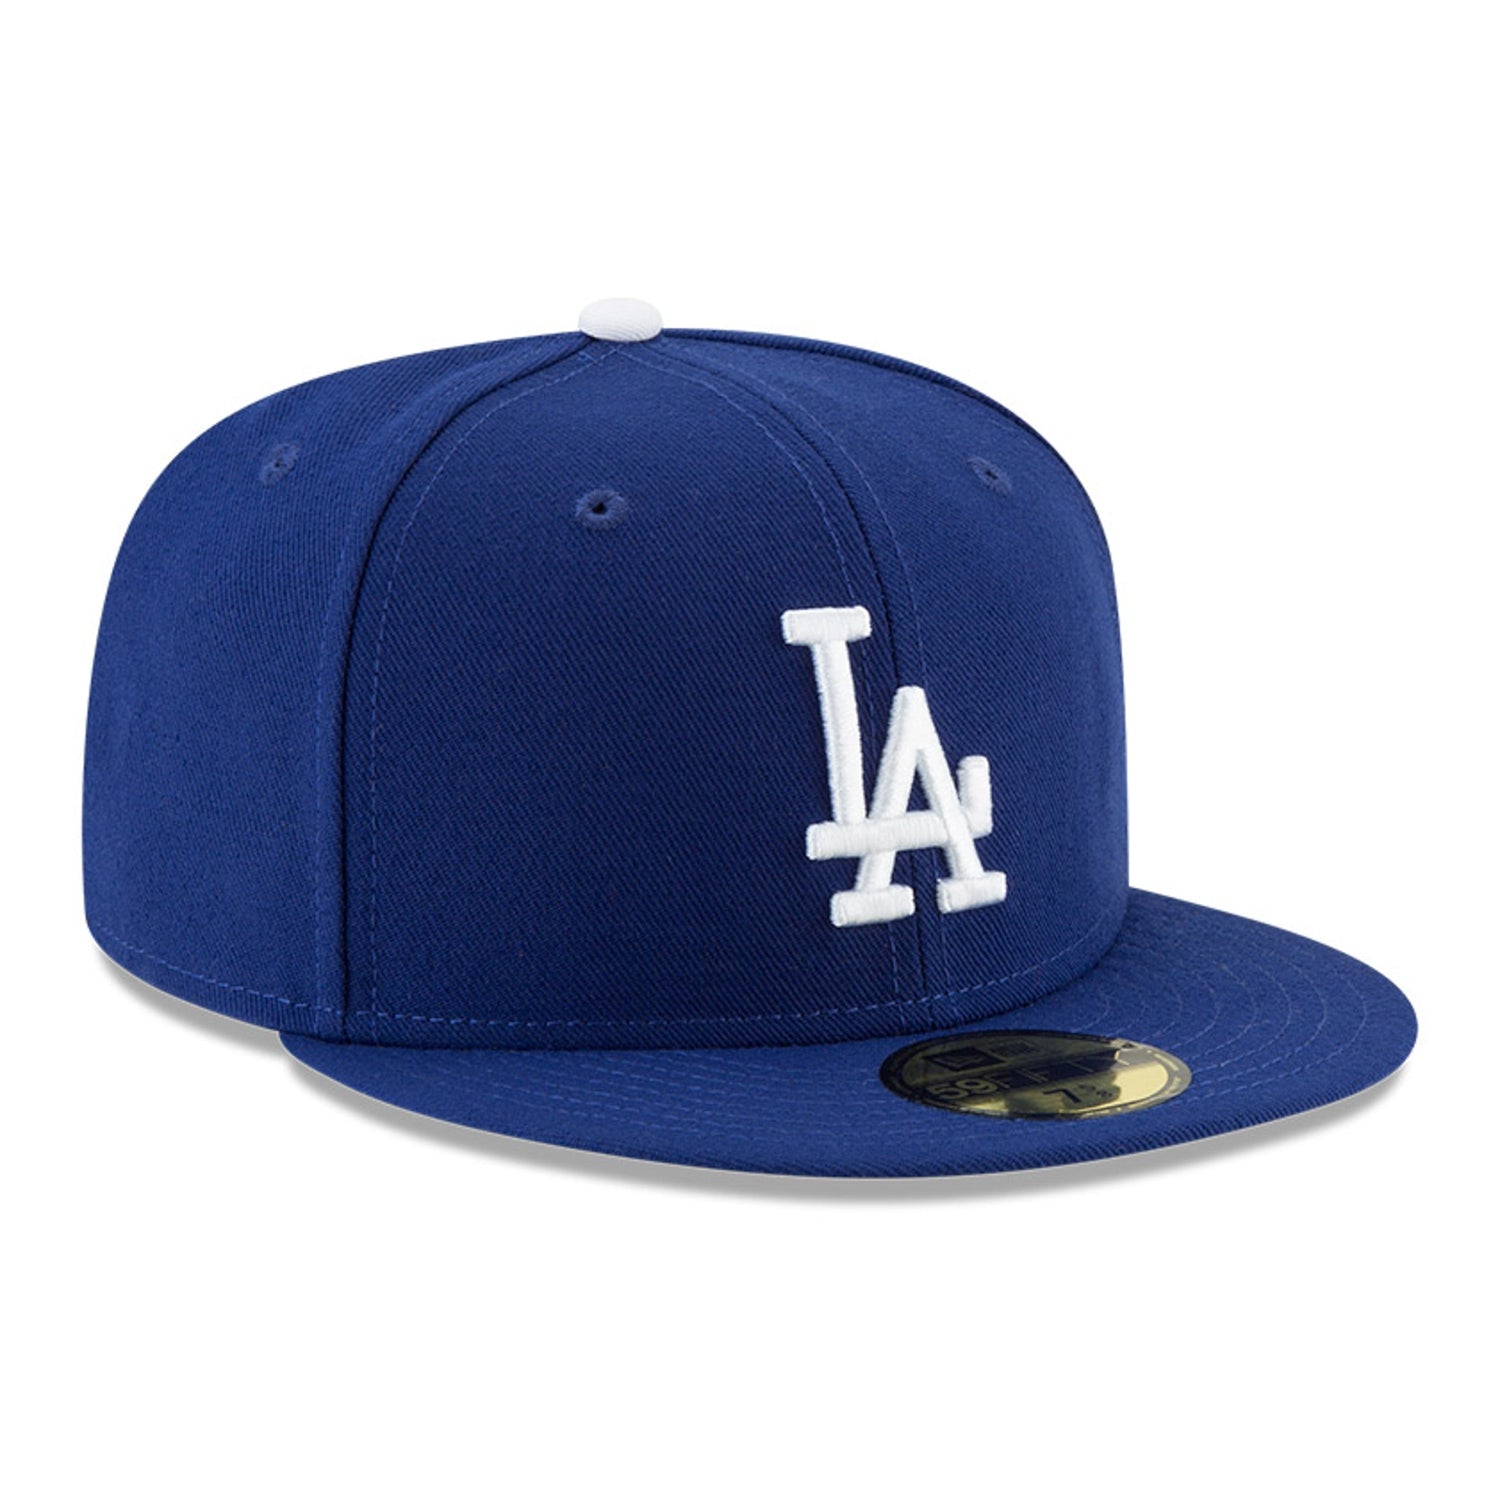 Los Angeles Baseball Hat Light Royal Blue 1959 All Star Game New Era 59FIFTY Fitted Light Royal Blue / White / 8